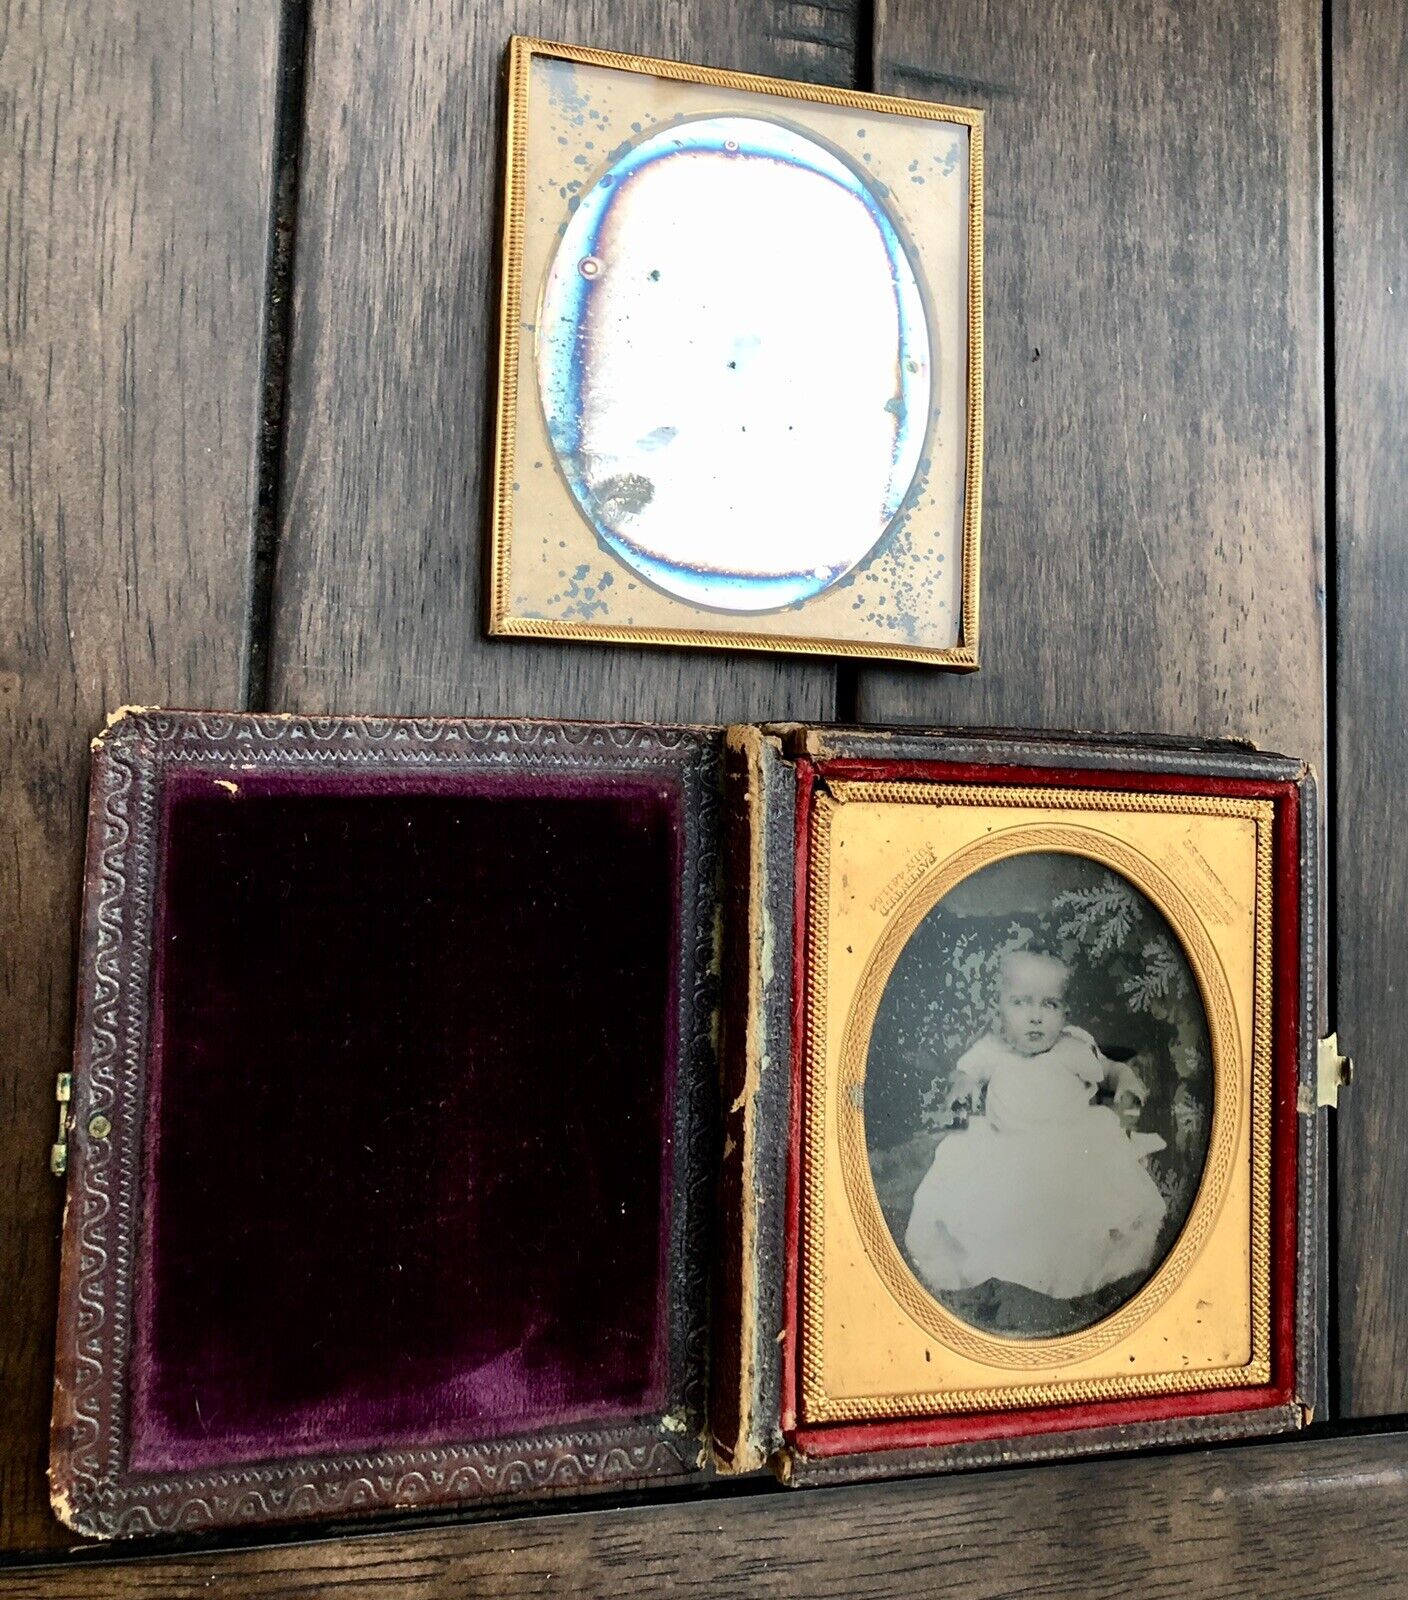 Small Lot, 1/6 Gutekunst Ambrotype of a Baby & Woman Wearing Mourning Bands?